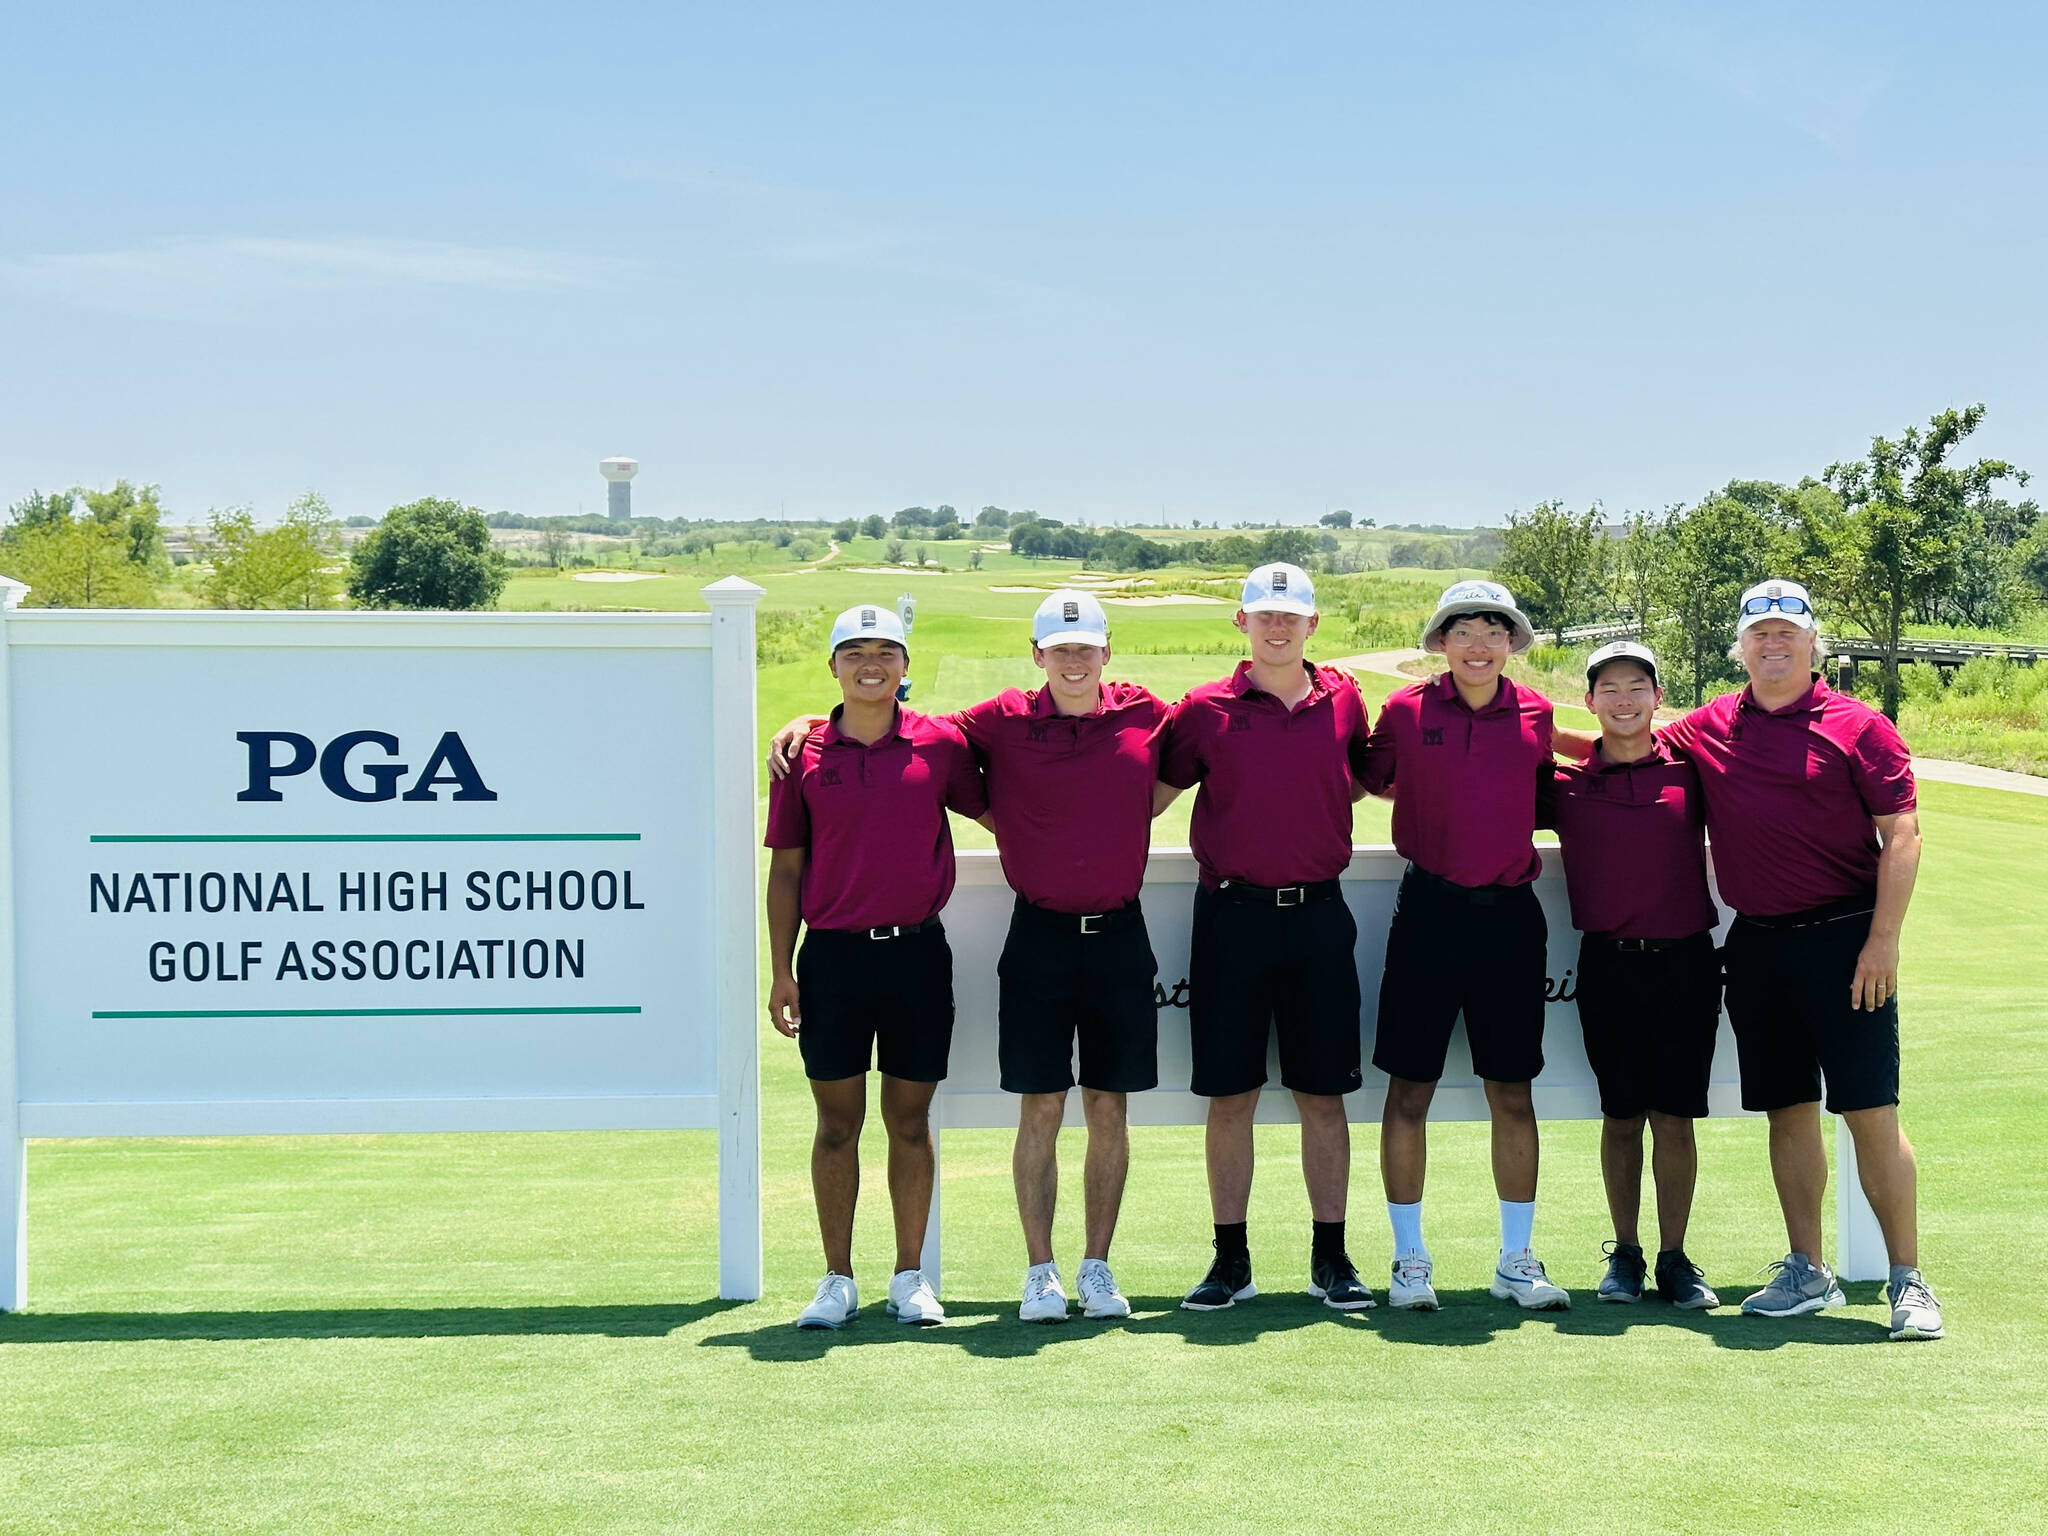 From left to right, Mercer Island High School golfers Elliott Hoang, Spencer Smith, Evan Otte, James Wooje Chung and Wonjoon Seo with coach and adviser Tyson Peters at the 2023 PGA Boys High School Golf National Invitational in Frisco, Texas, in July. Photo courtesy of Jeff Otte